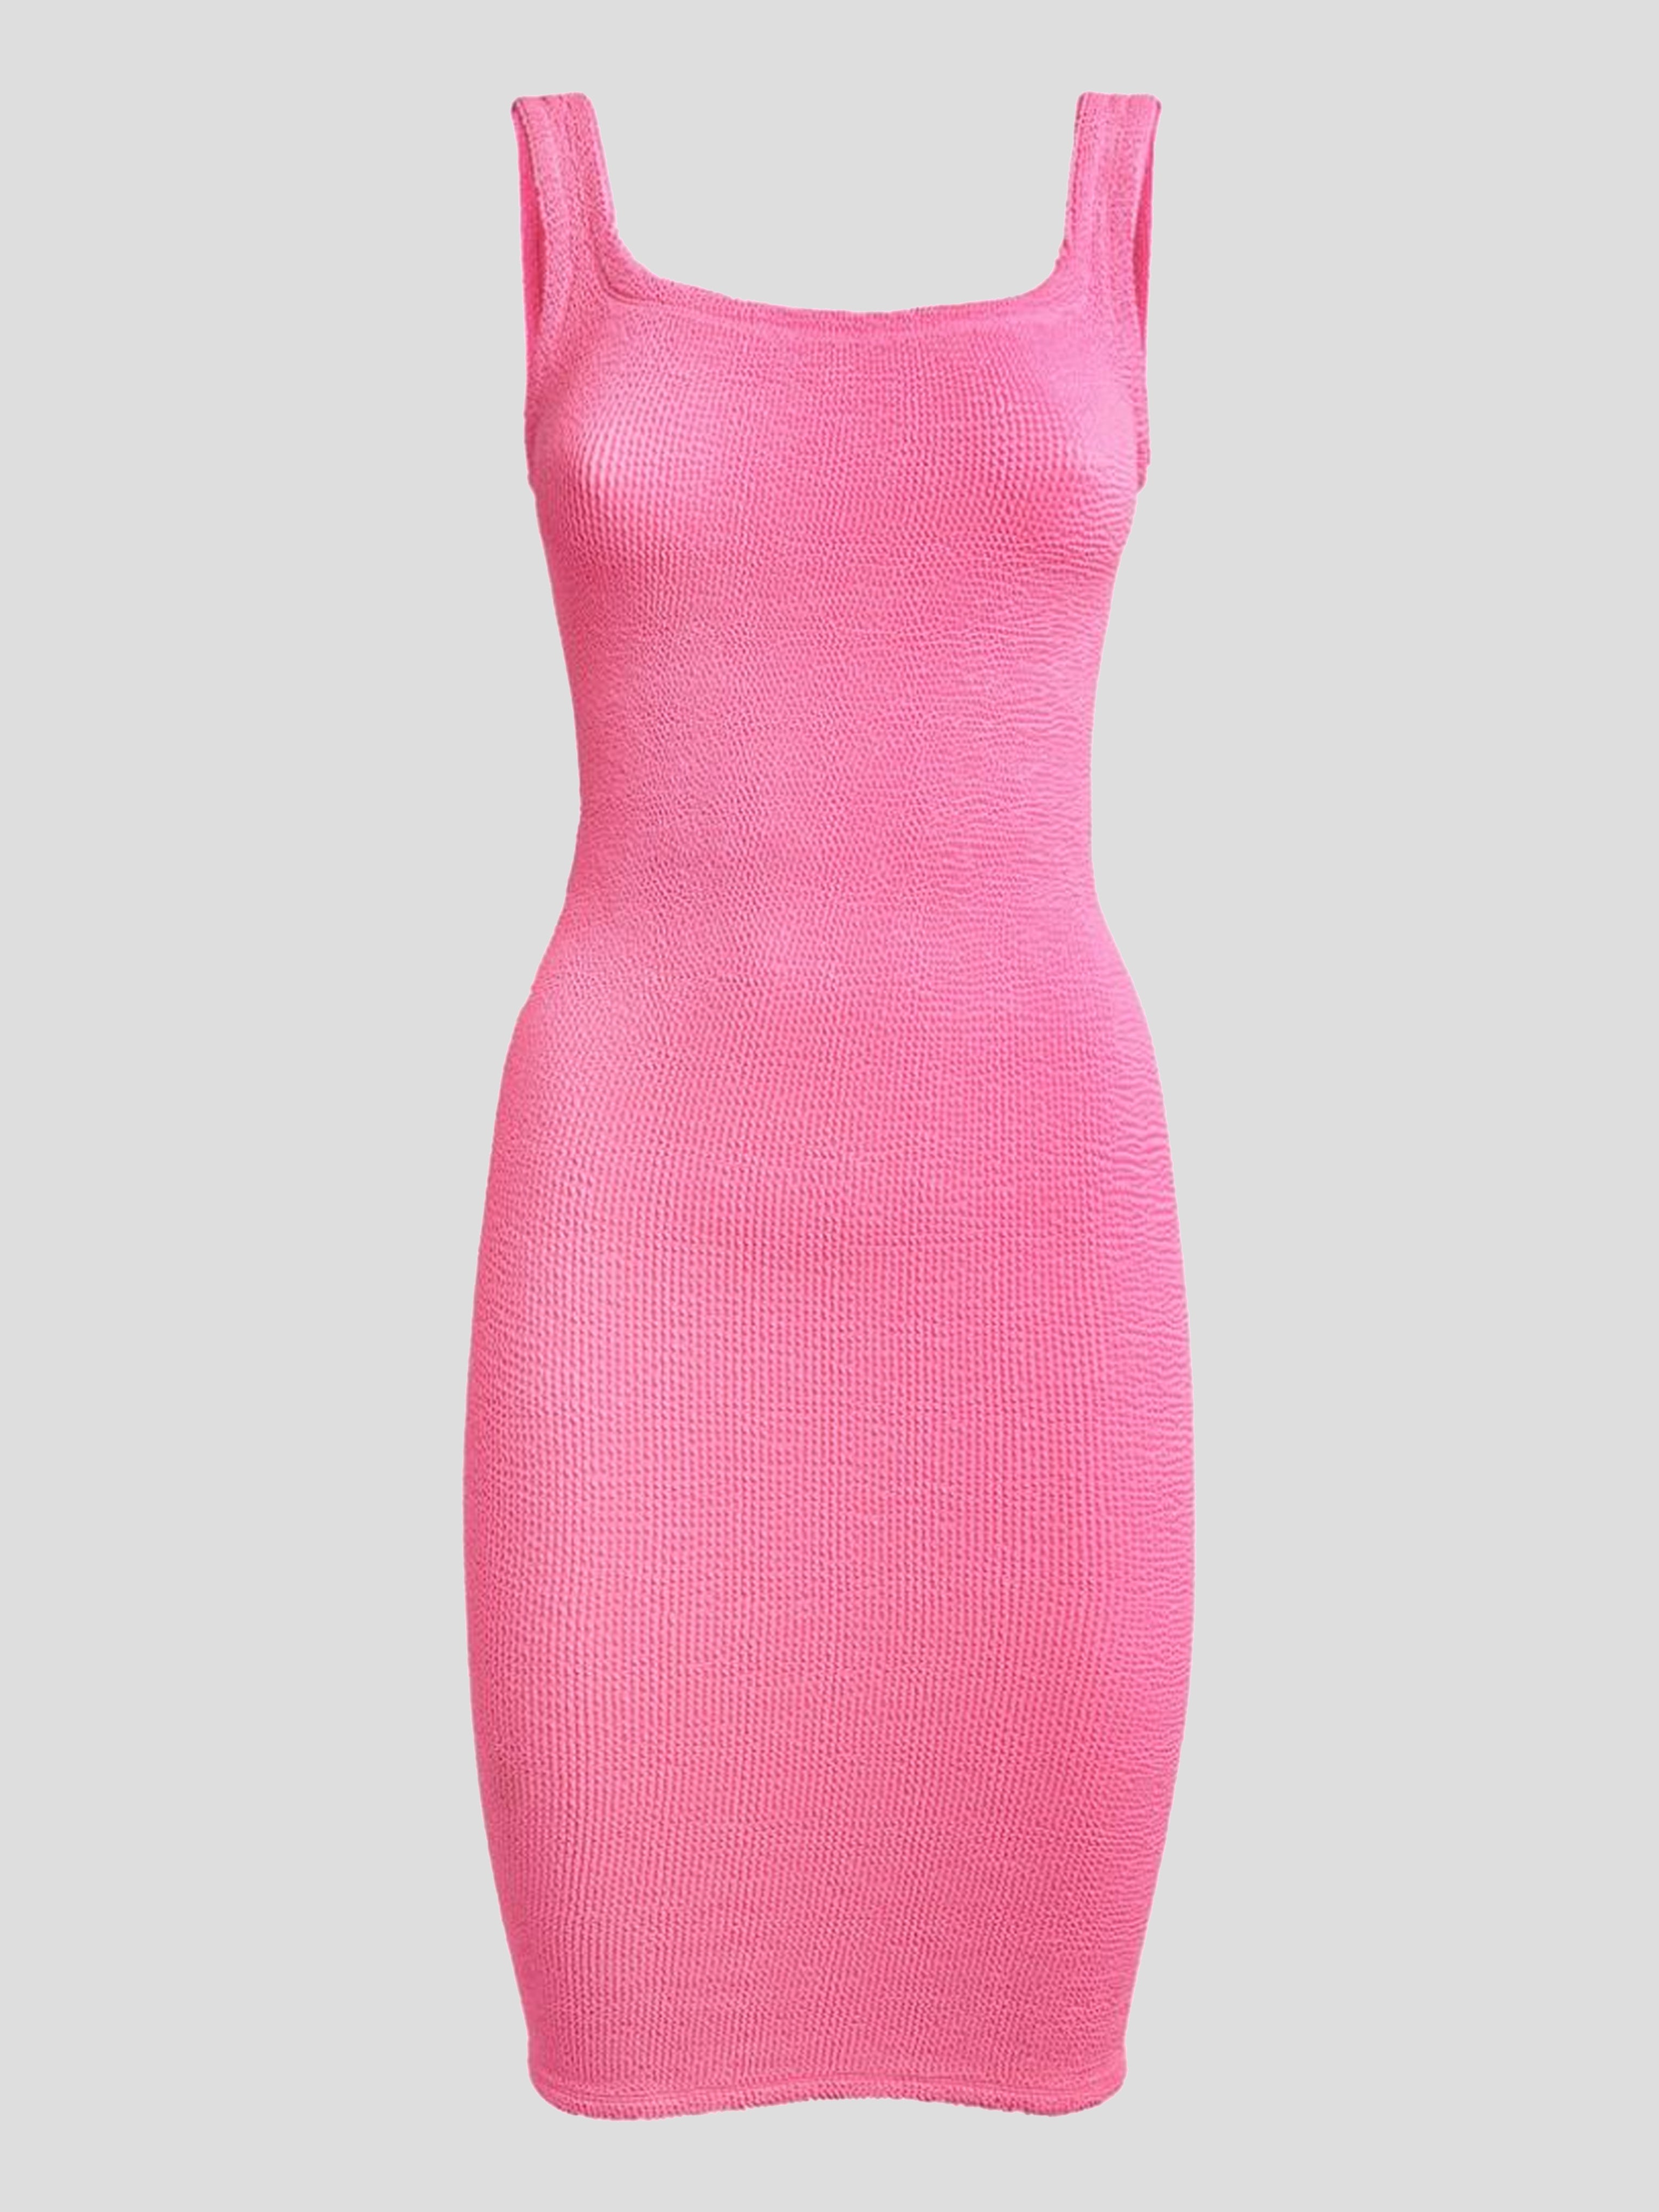 ctdiral Racerback Tank Dresses for Women Basic Solid India | Ubuy